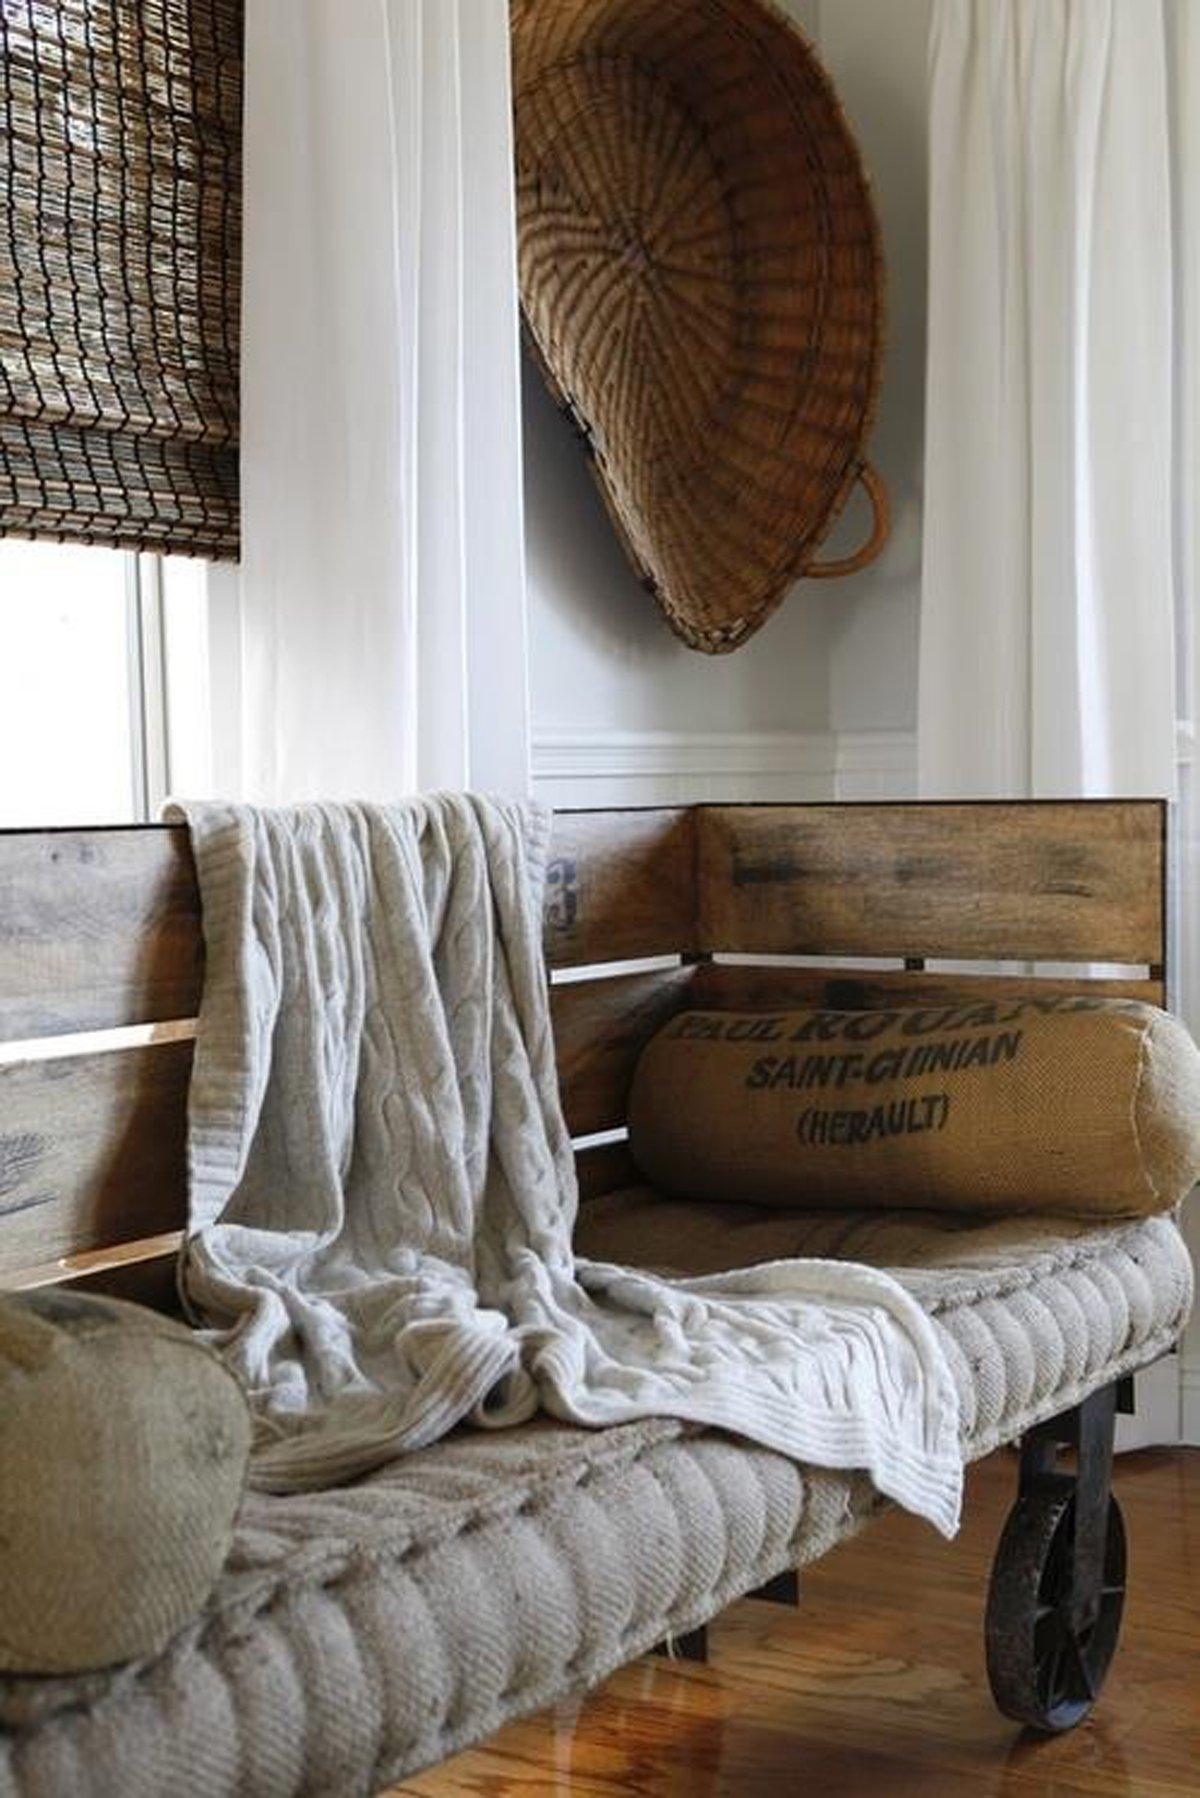 12 DIY Rustic Home Decor Projects For All Rustic Design Lovers